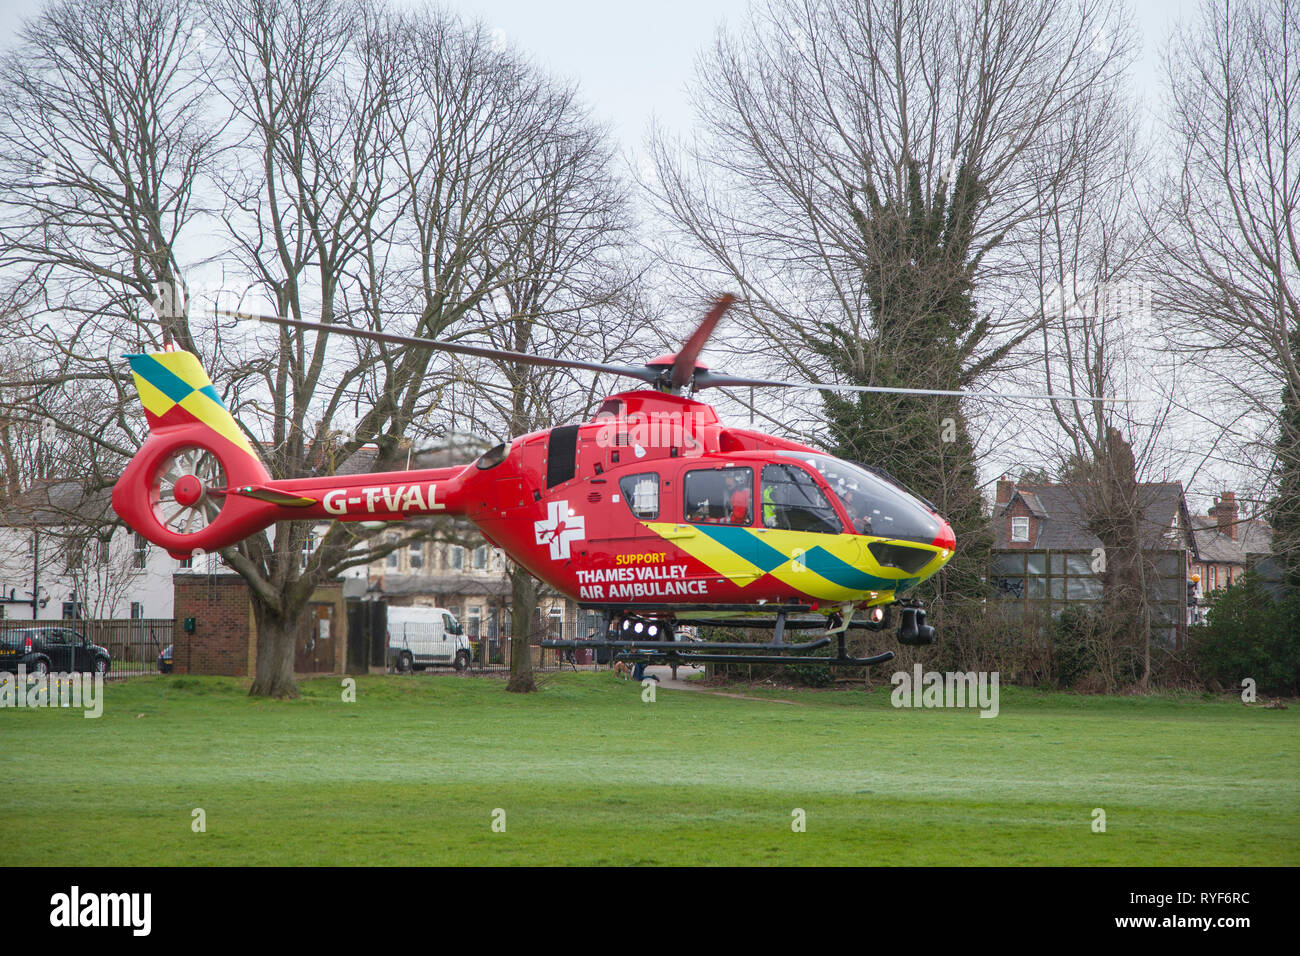 Air Ambulance paramedics return from attending a road traffic accident to the Thames Valley Air Ambulance Stock Photo